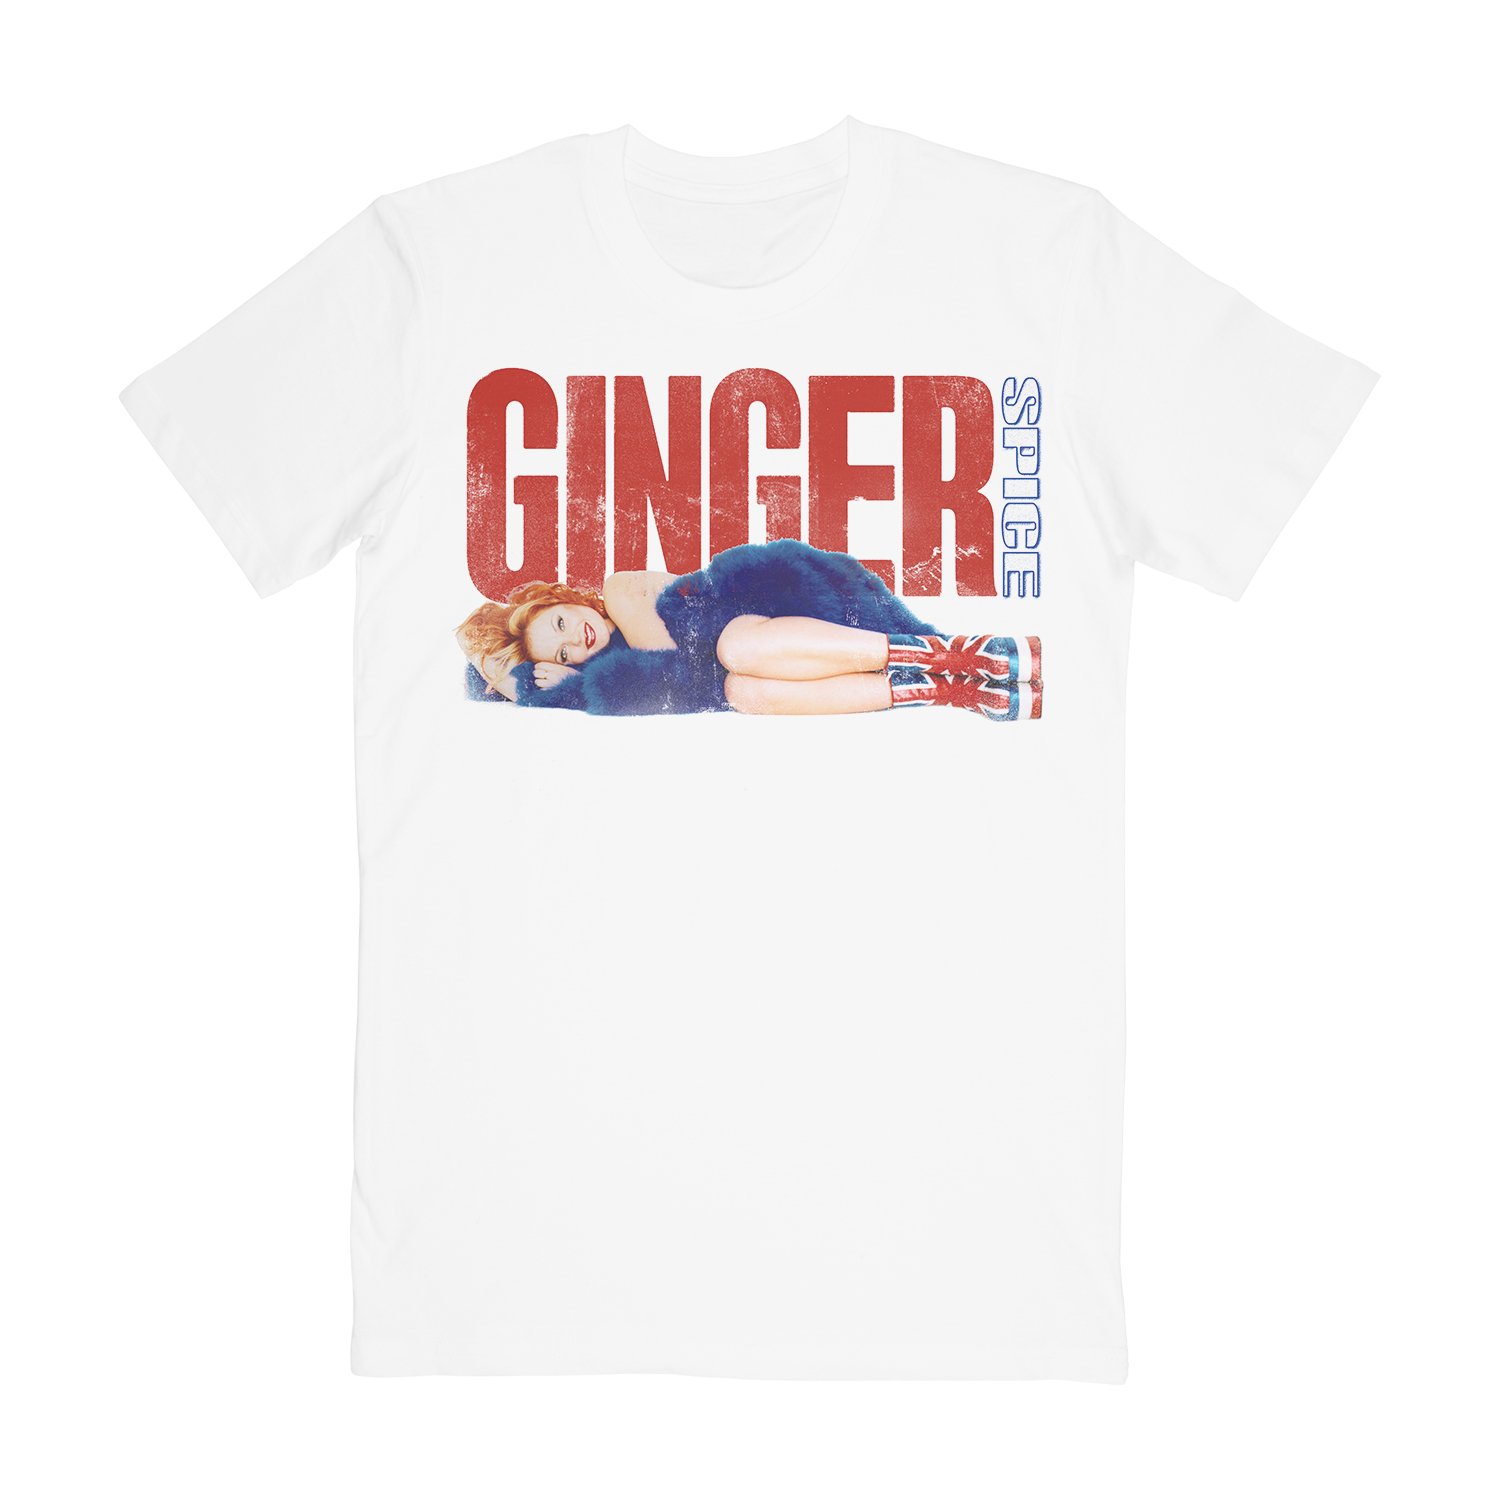 Spice Girls - Ginger Spice Tee